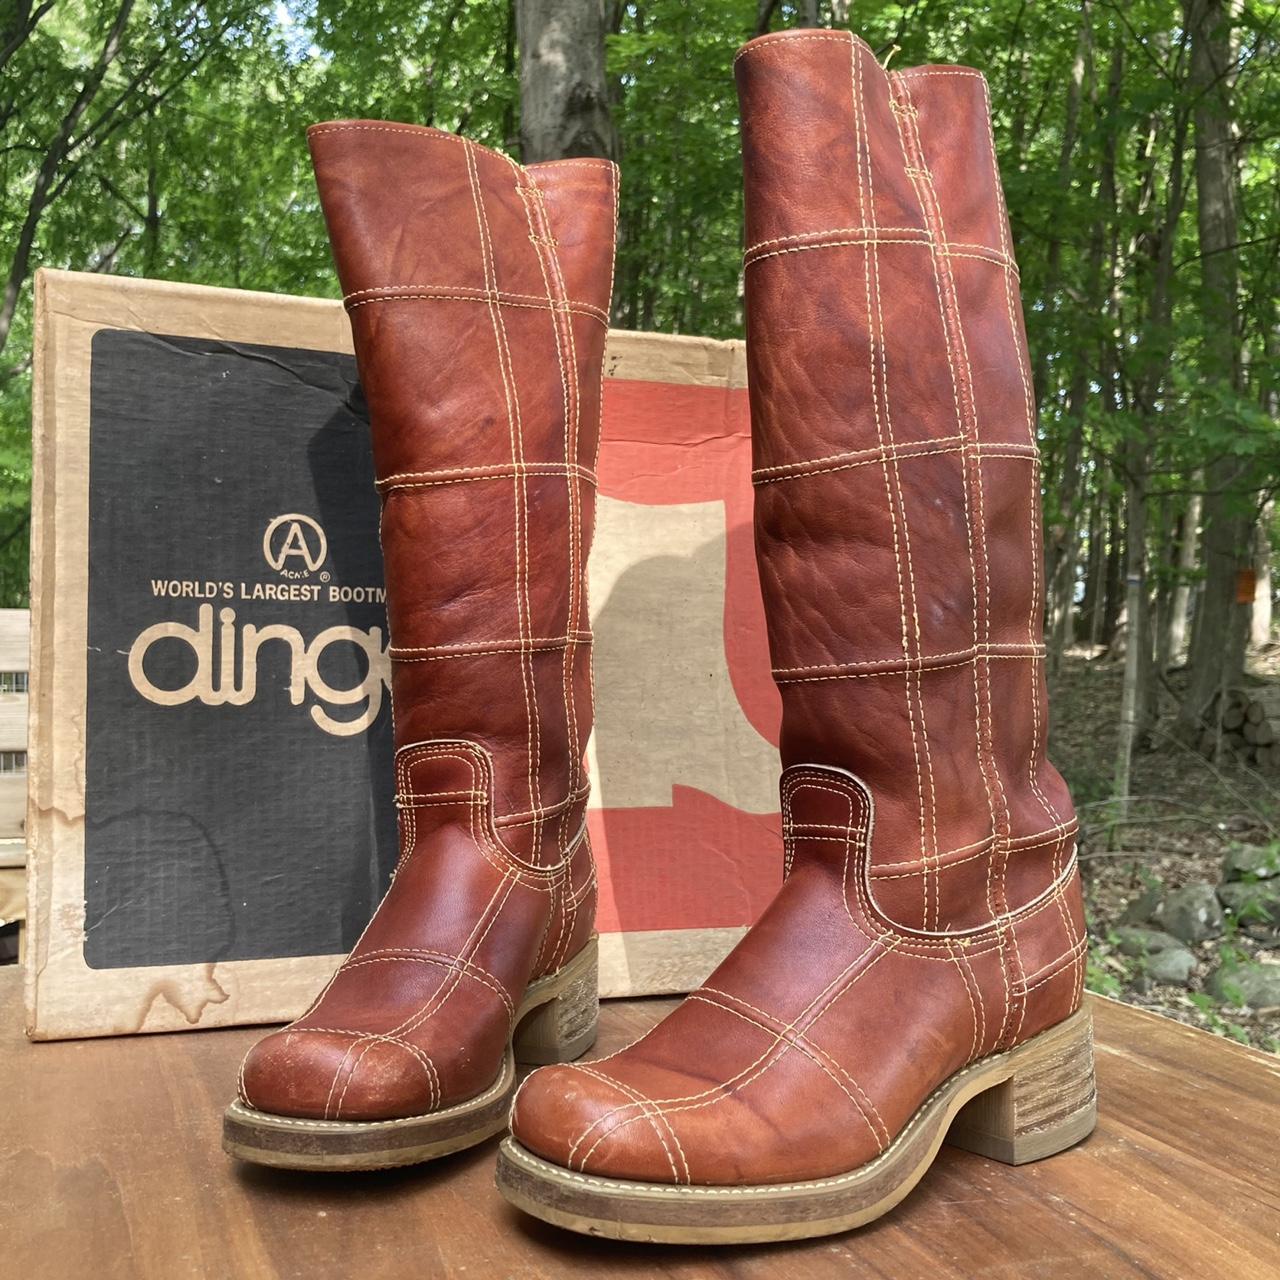 Dingo 1969 Women's Burgundy and Brown Boots